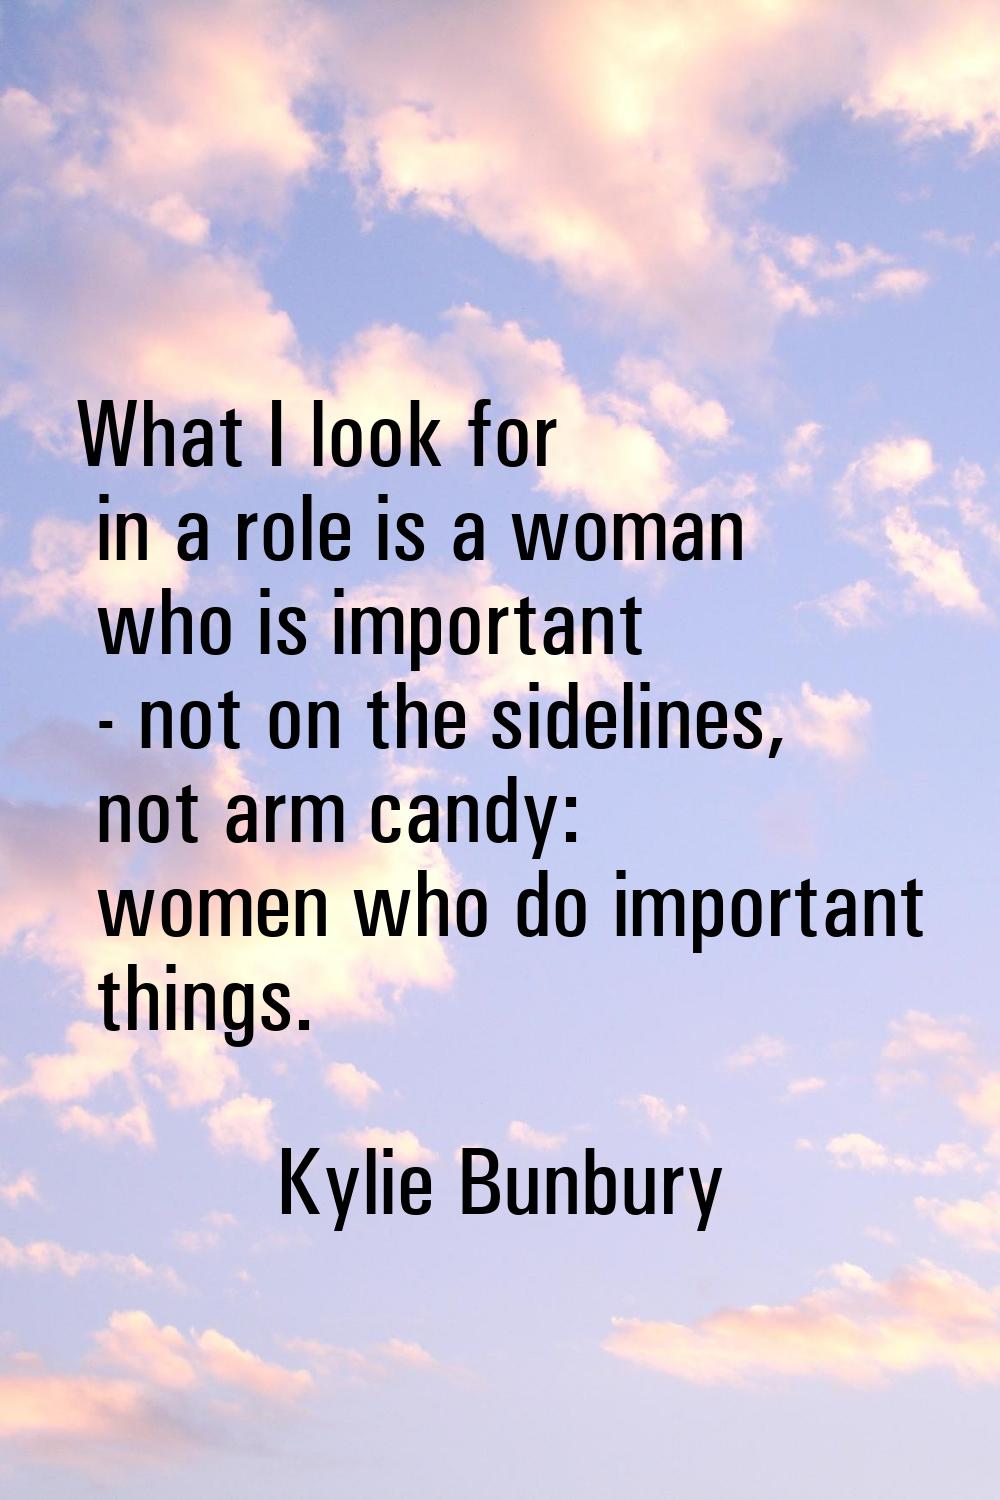 What I look for in a role is a woman who is important - not on the sidelines, not arm candy: women 